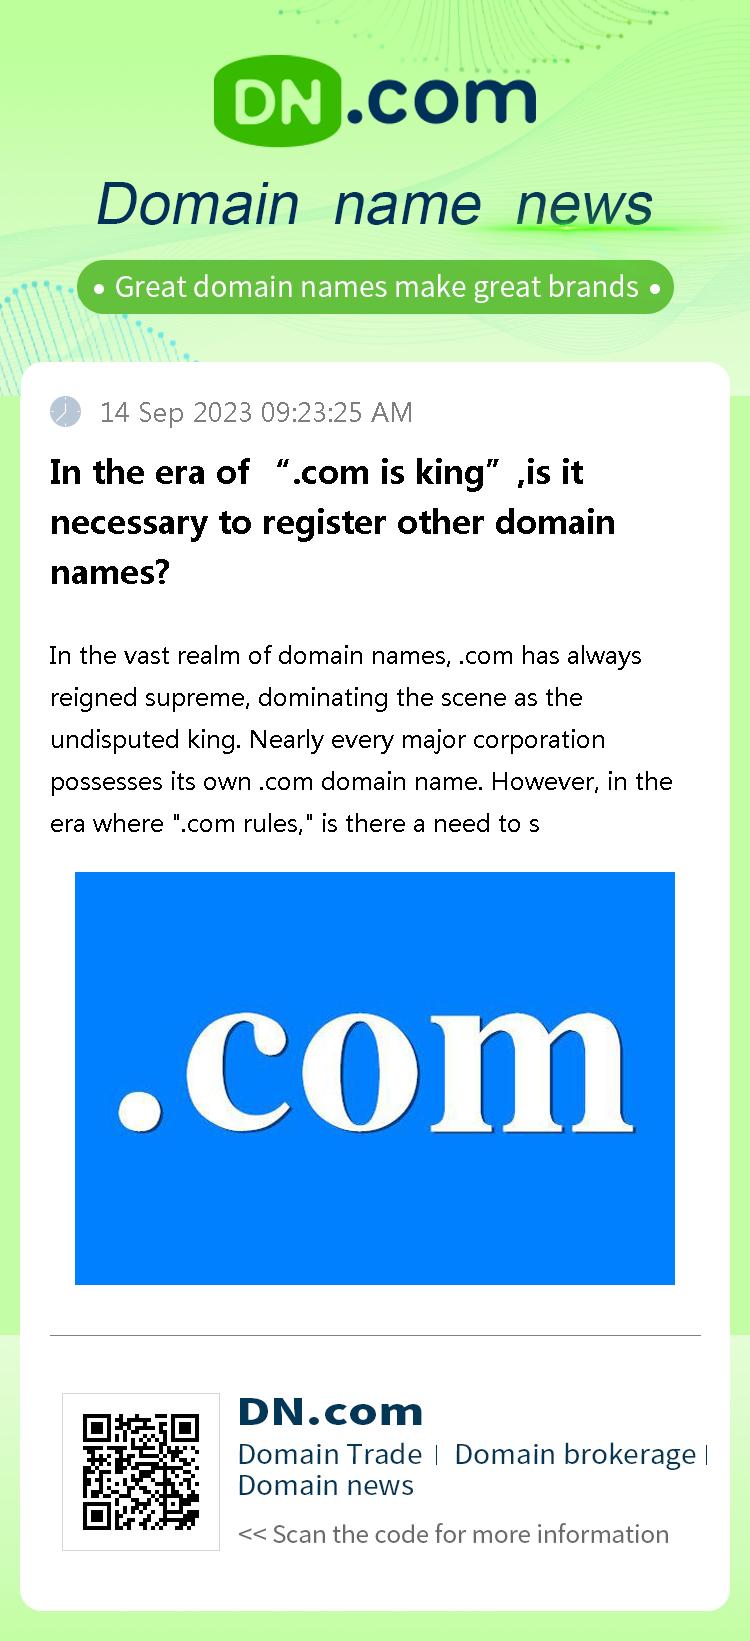 In the era of “.com is king”,is it necessary to register other domain names?